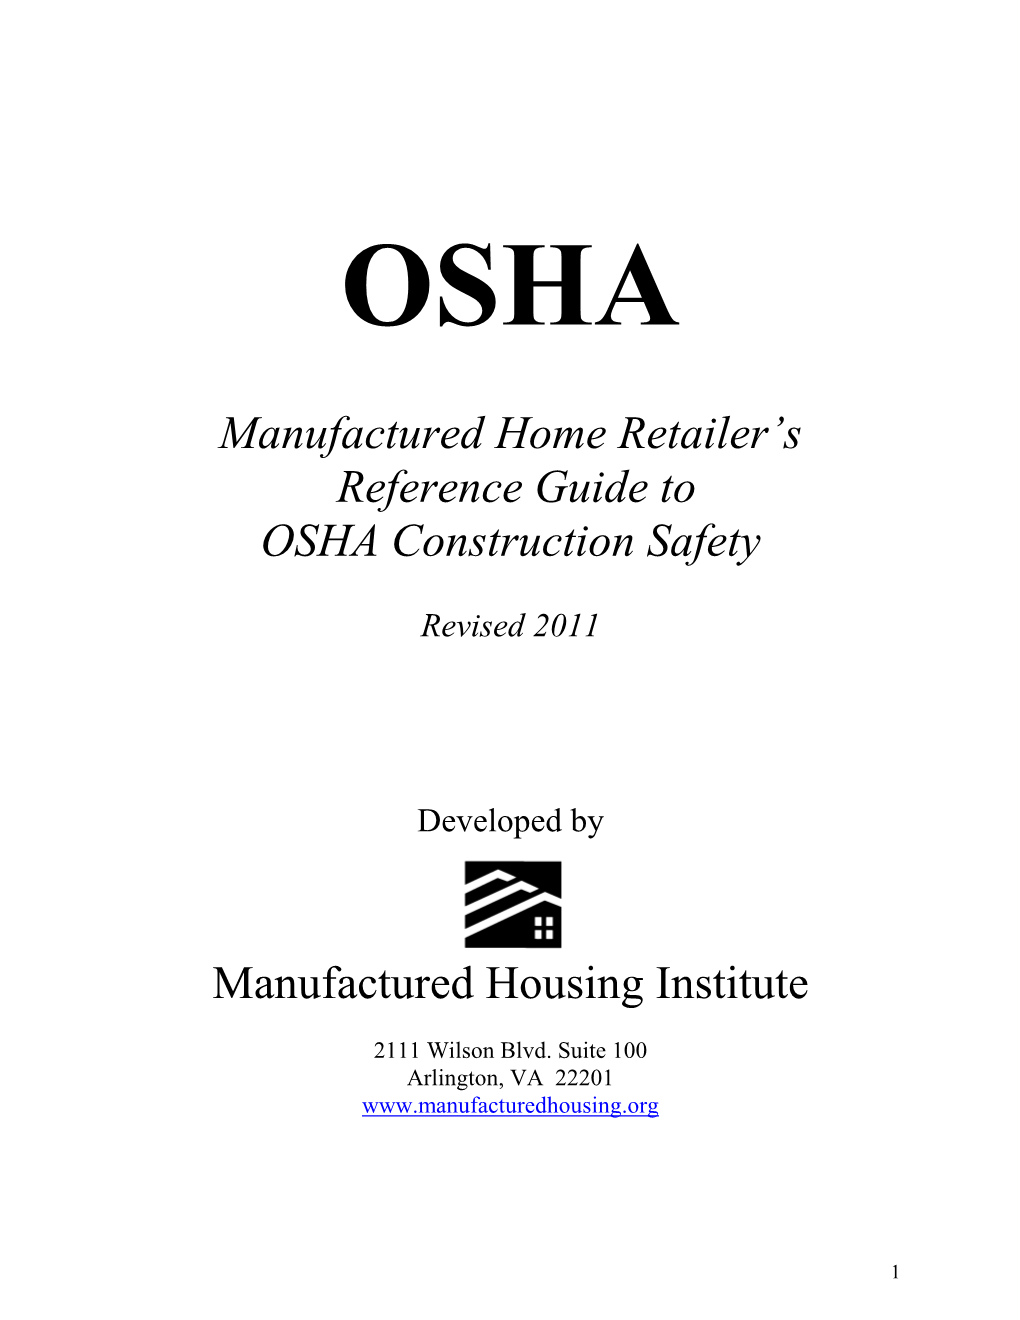 Revised Osha Guide for Retailers